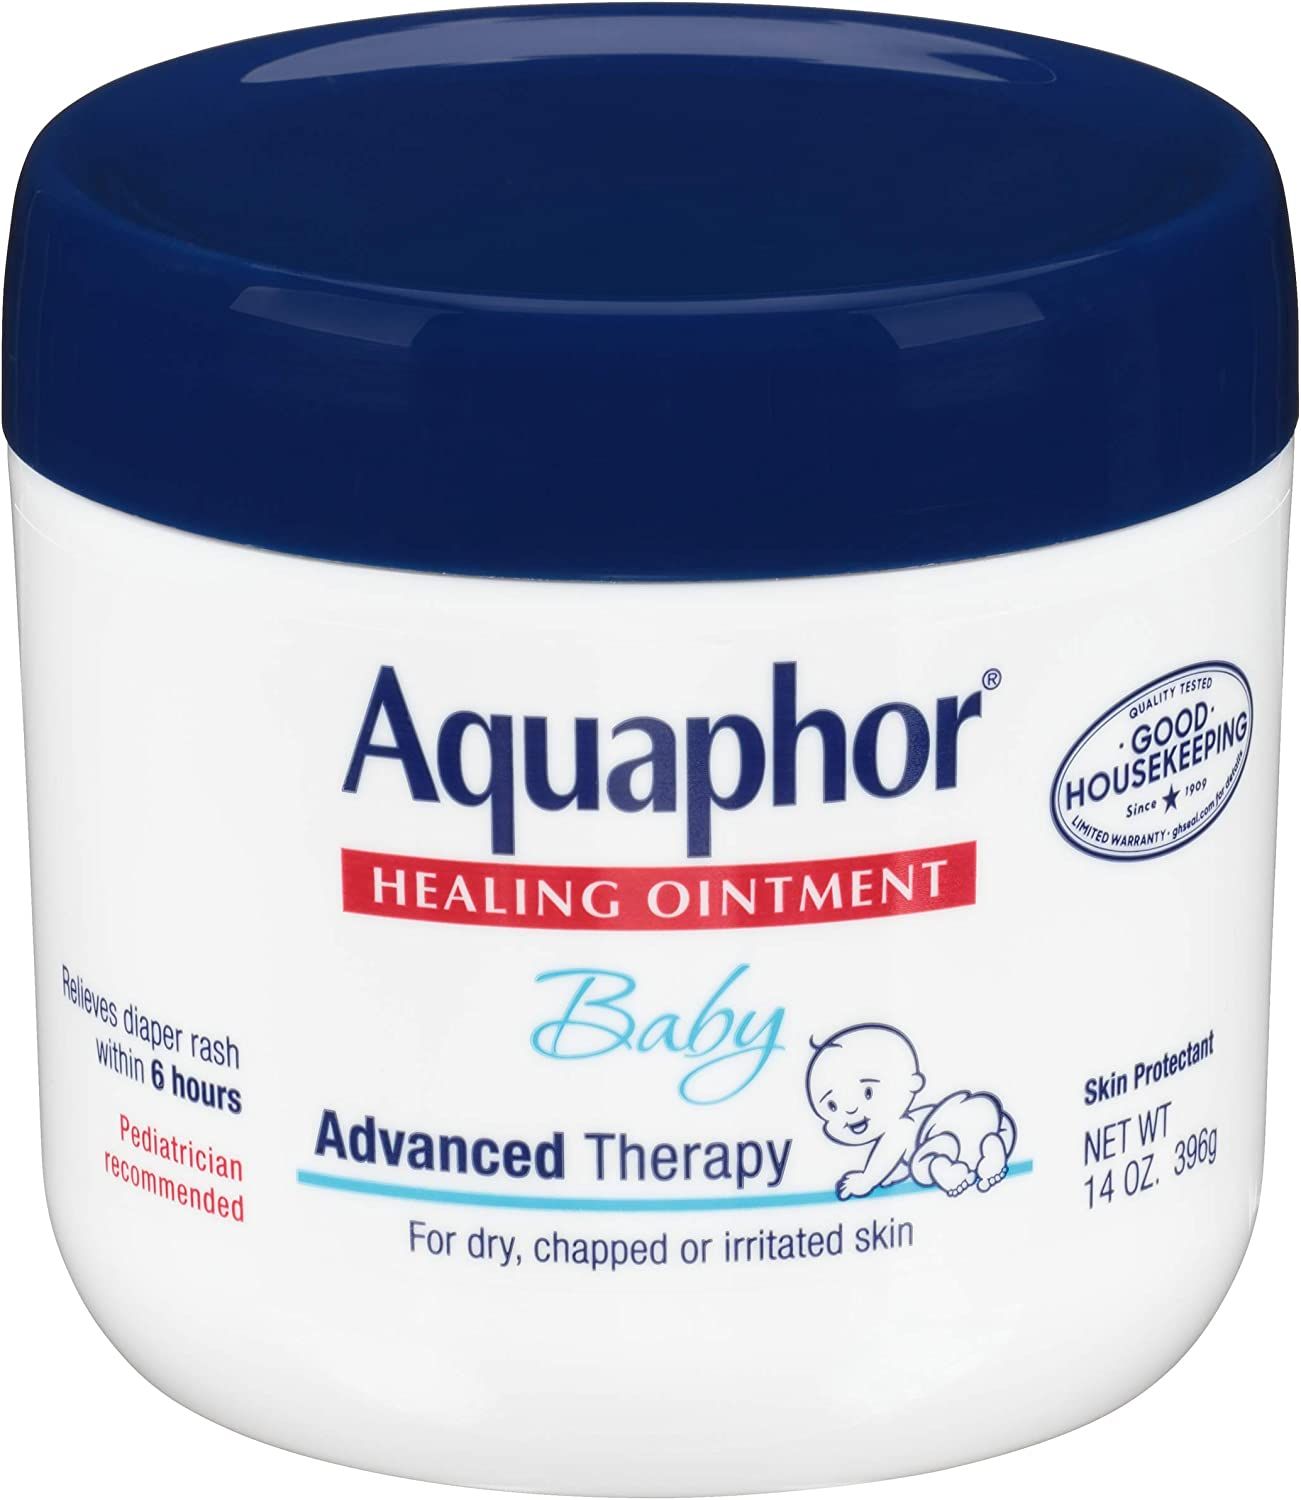 Aquaphor Baby Healing Ointment - Advance Therapy for Diaper Rash, Chapped Cheeks and Minor Scrape... | Amazon (US)